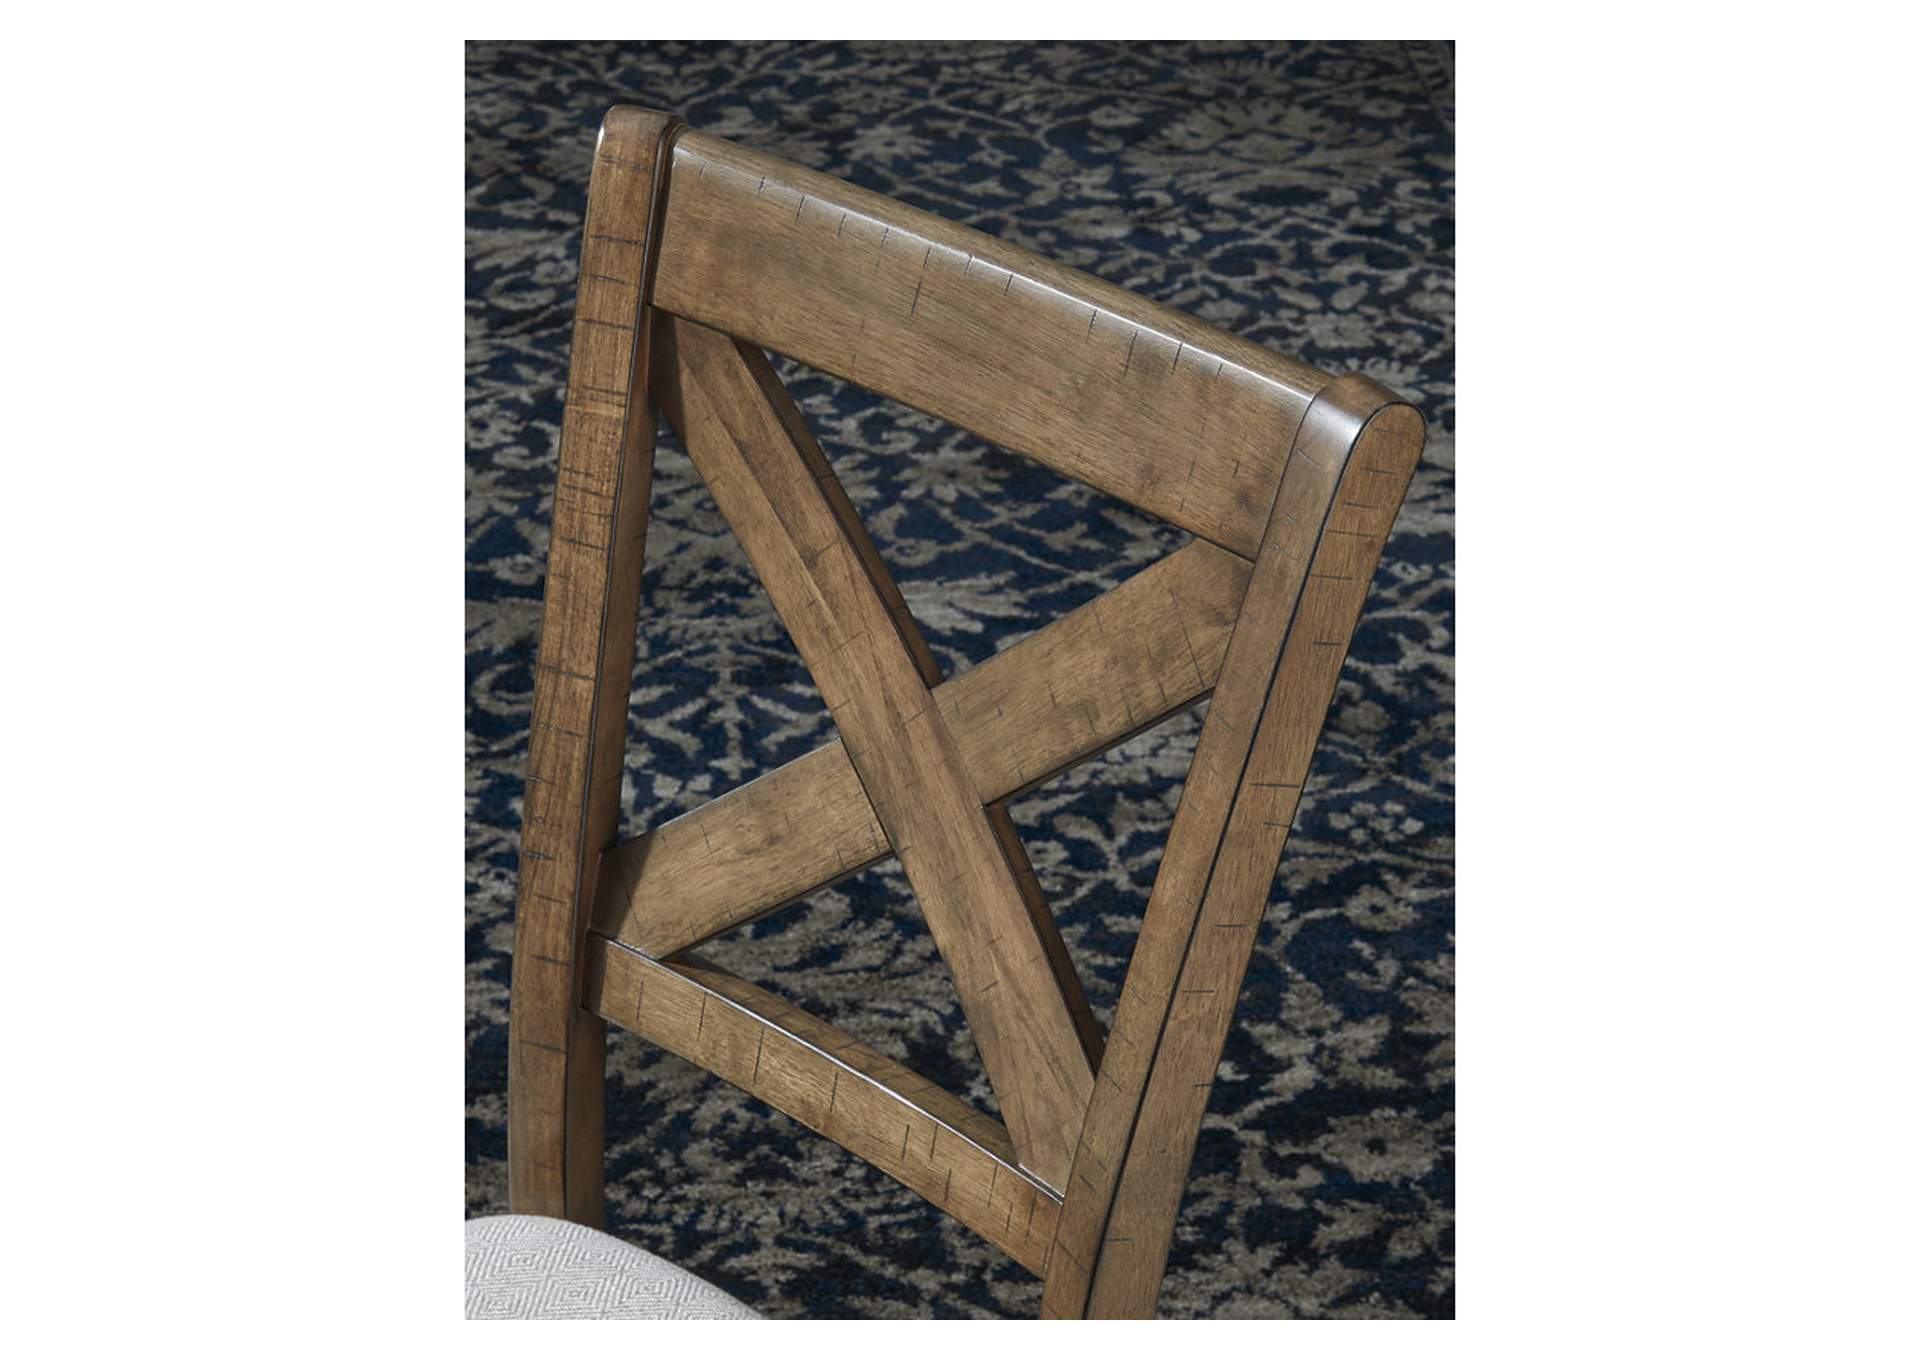 Moriville Dining Chair,Signature Design By Ashley